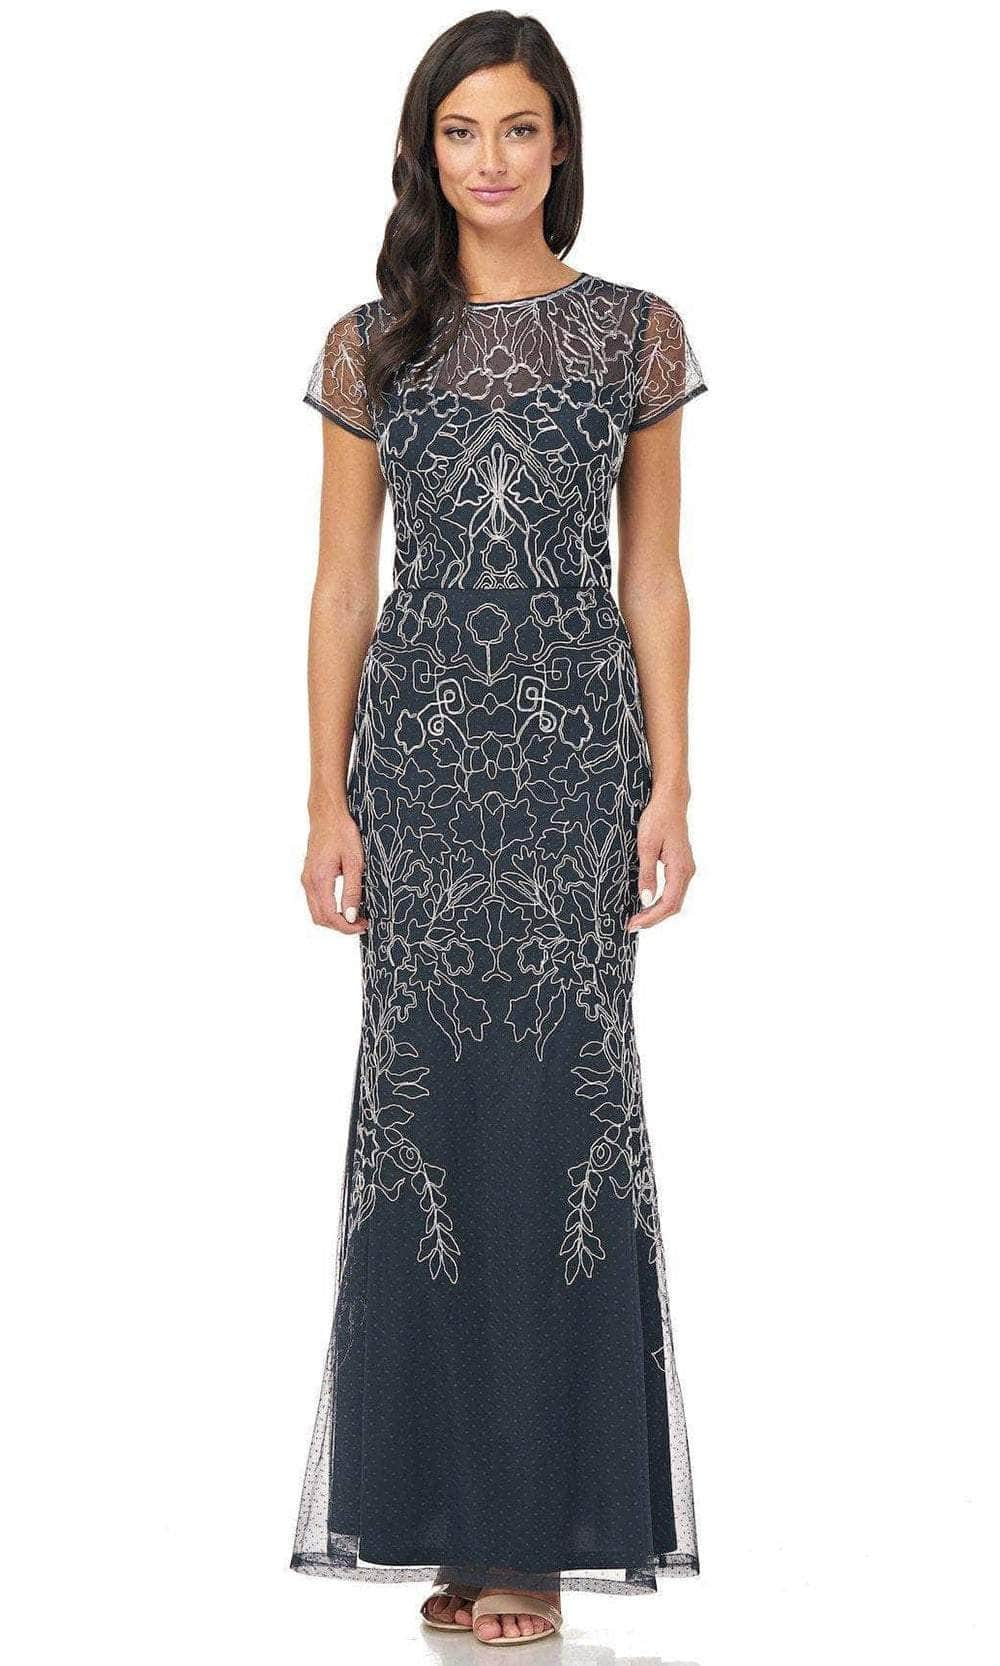 Image of JS Collections 866758 - Illusion Neck Short Sleeved Embroidered Dress